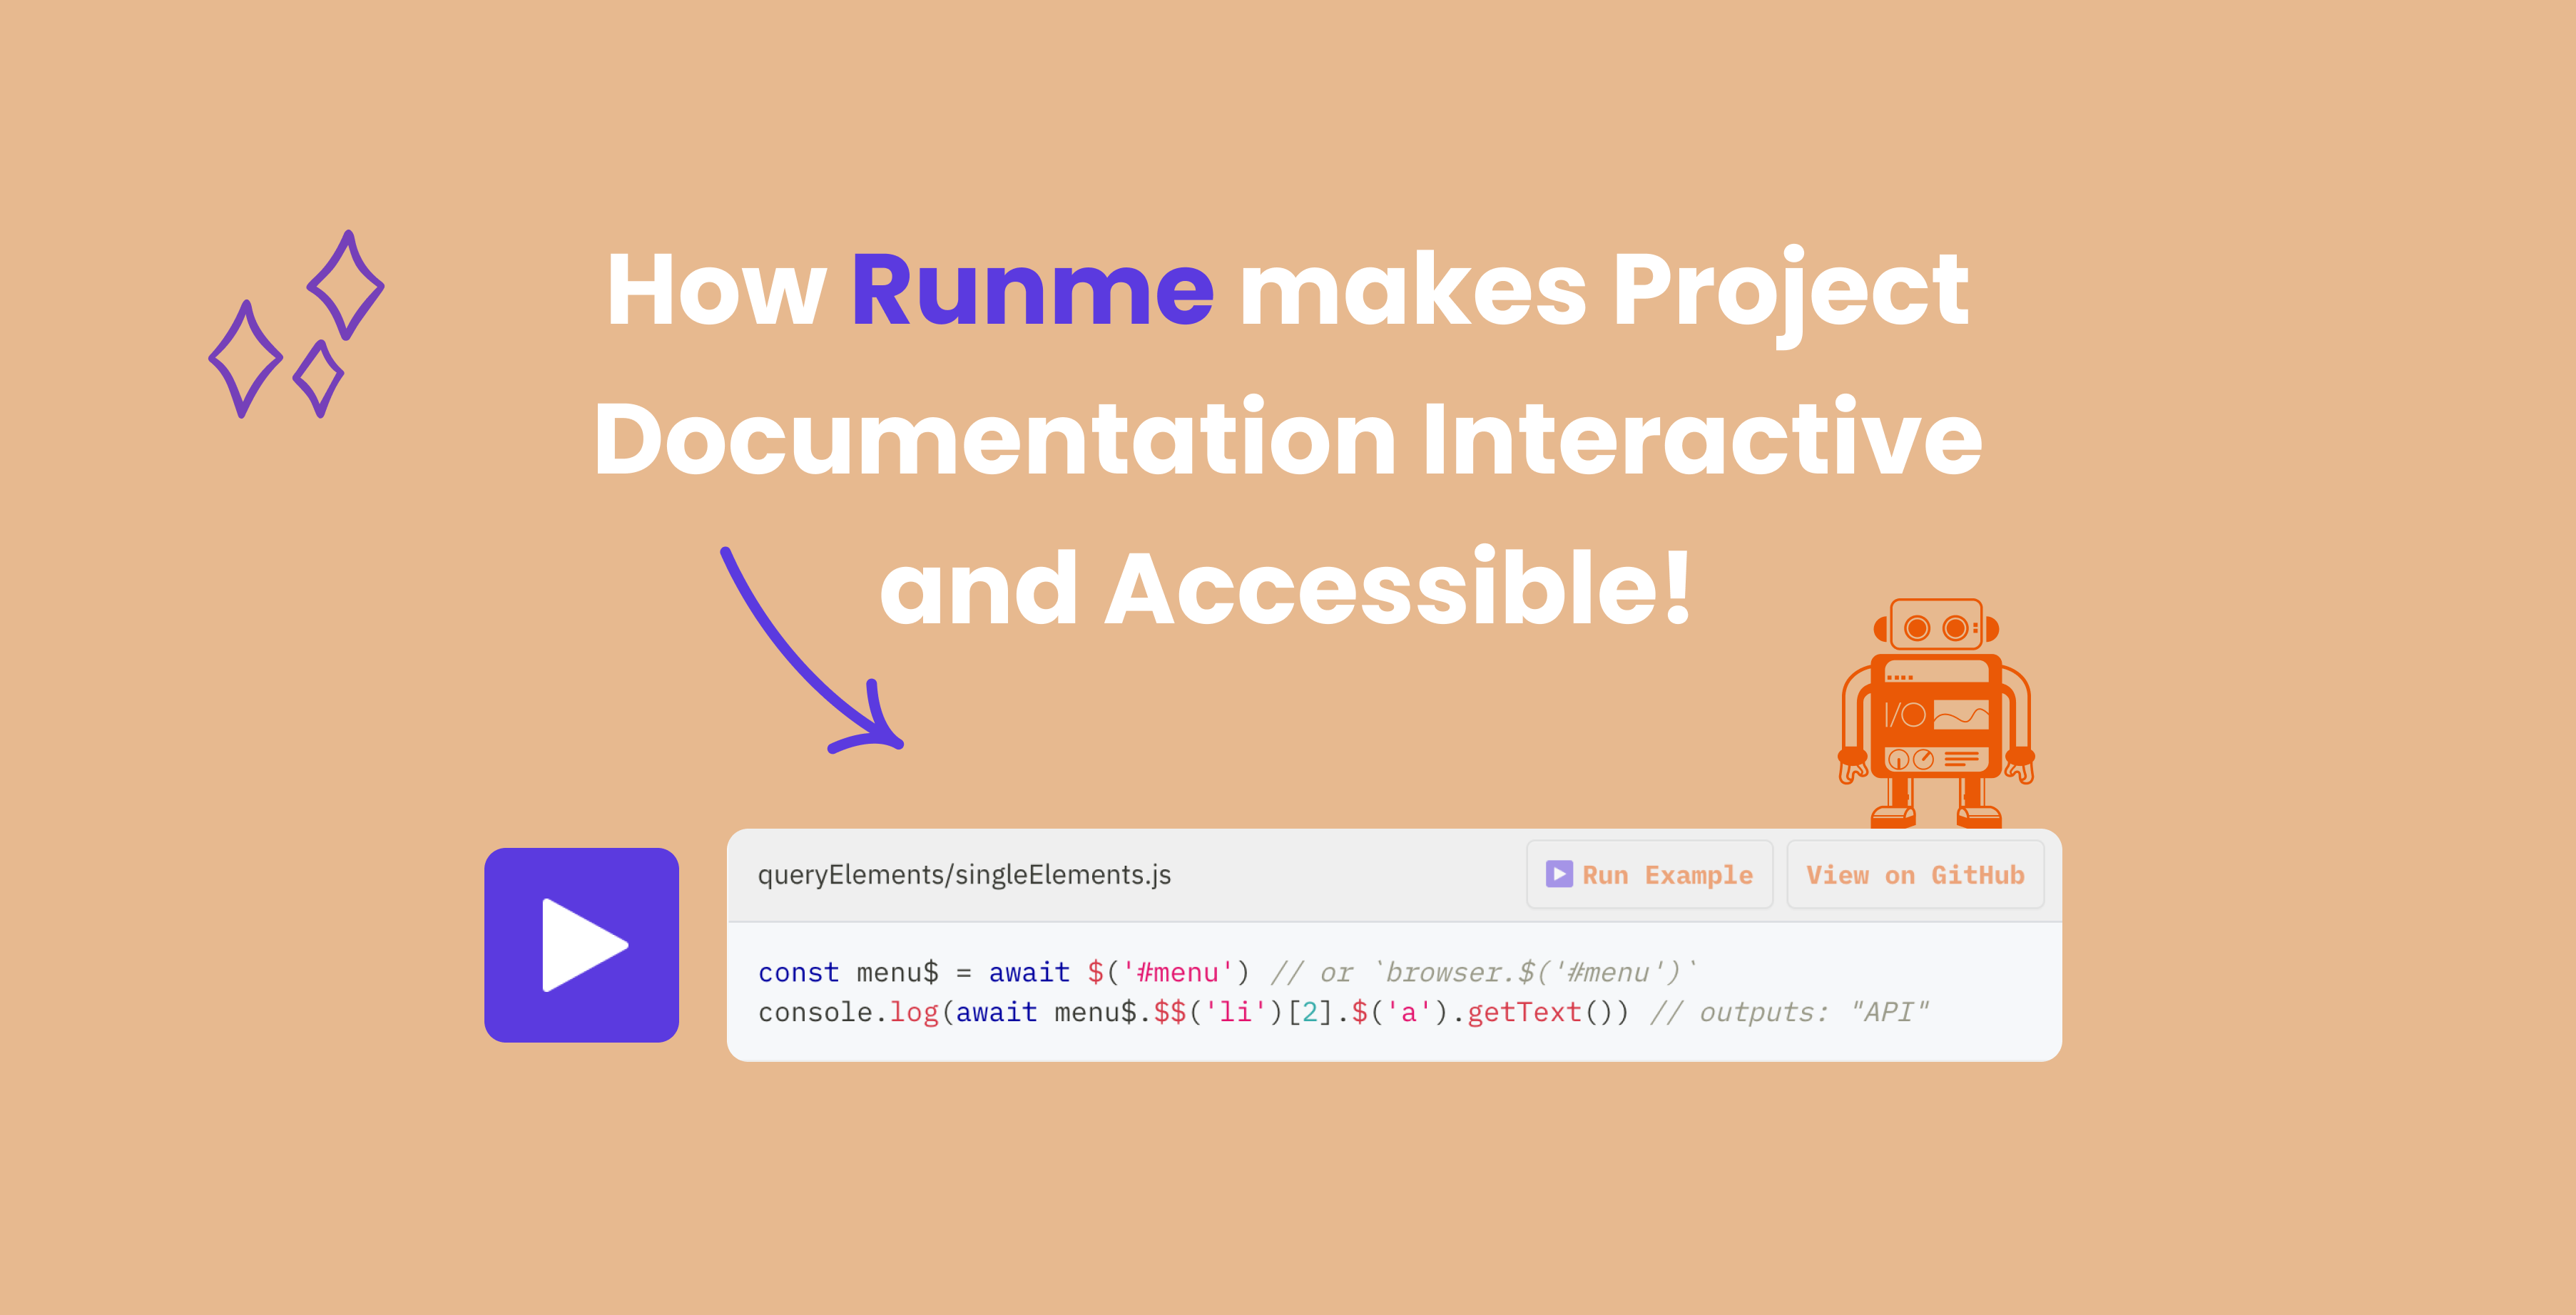 How Runme Makes Project Documentation Interactive and Accessible